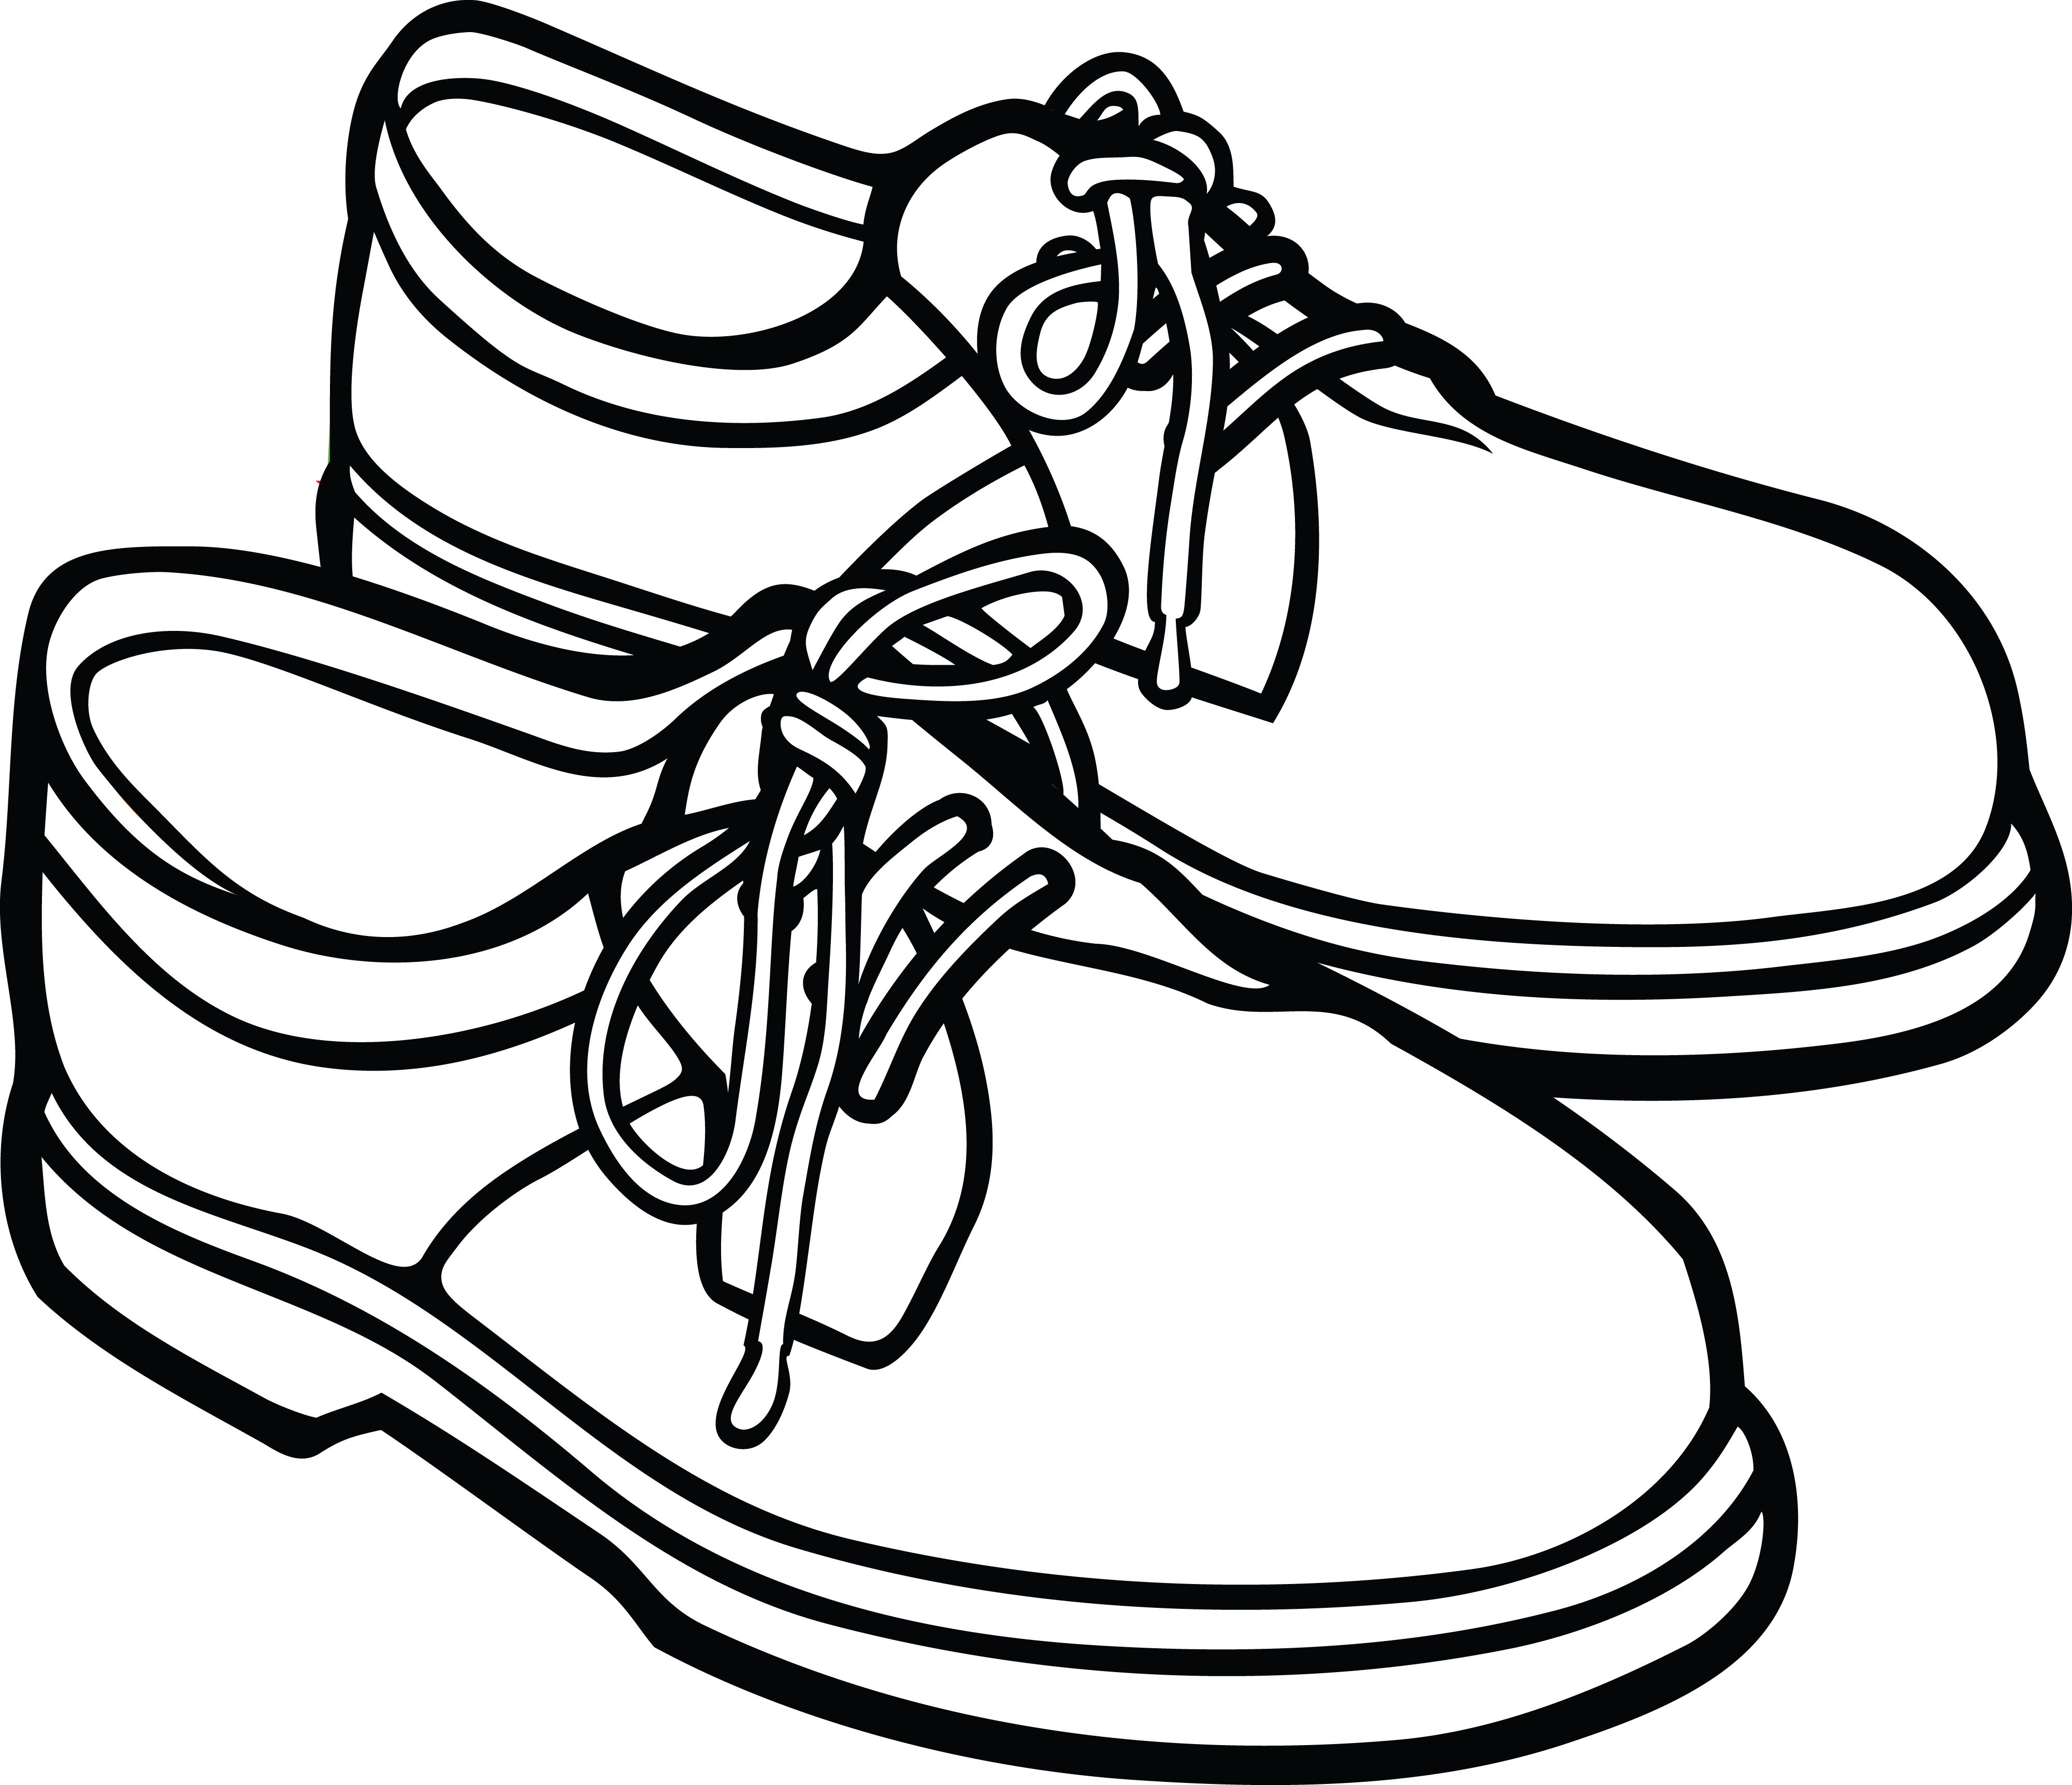 Clipart Of A pair of mens shoes free